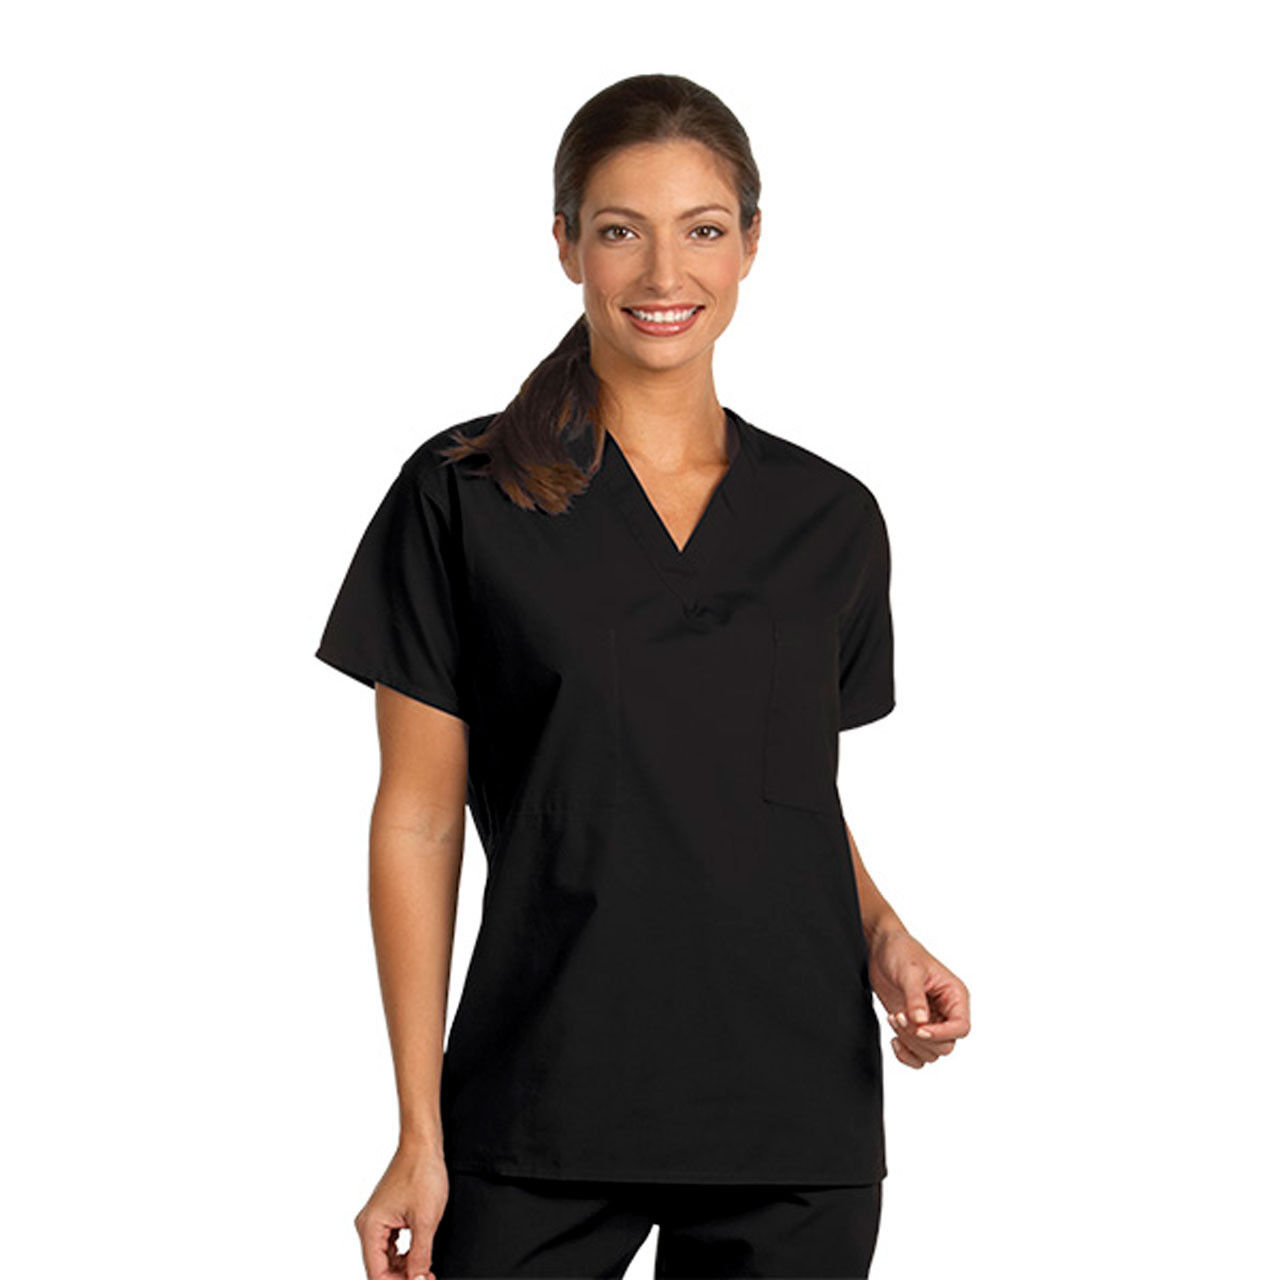 Can I reverse these black medical scrubs?